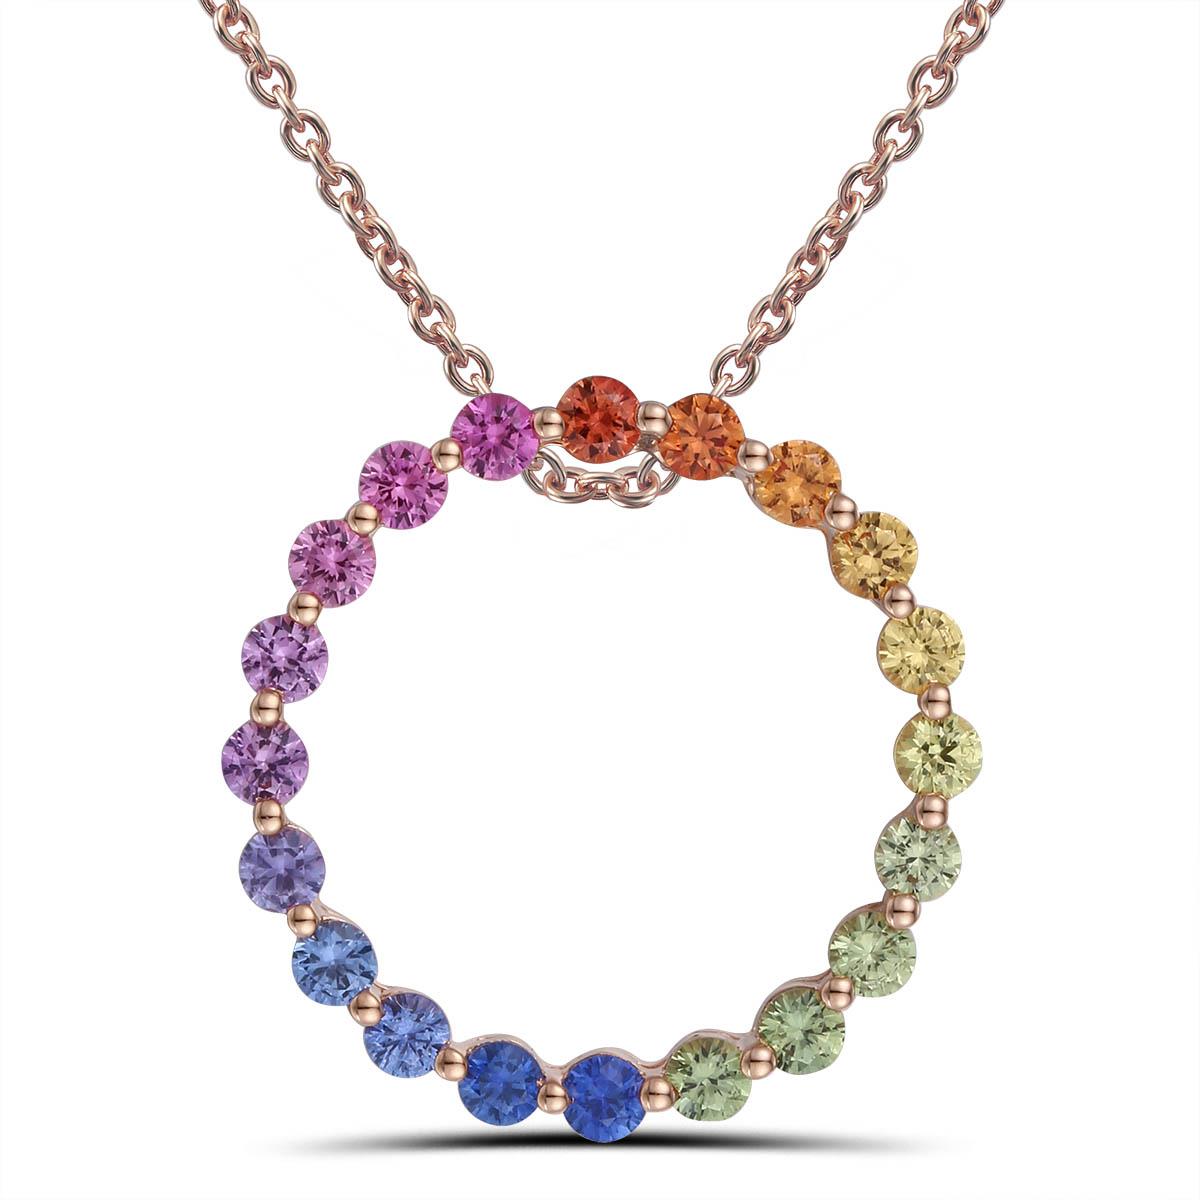 Tom French Jewellery | Independent Designer Jewellers In Ascot